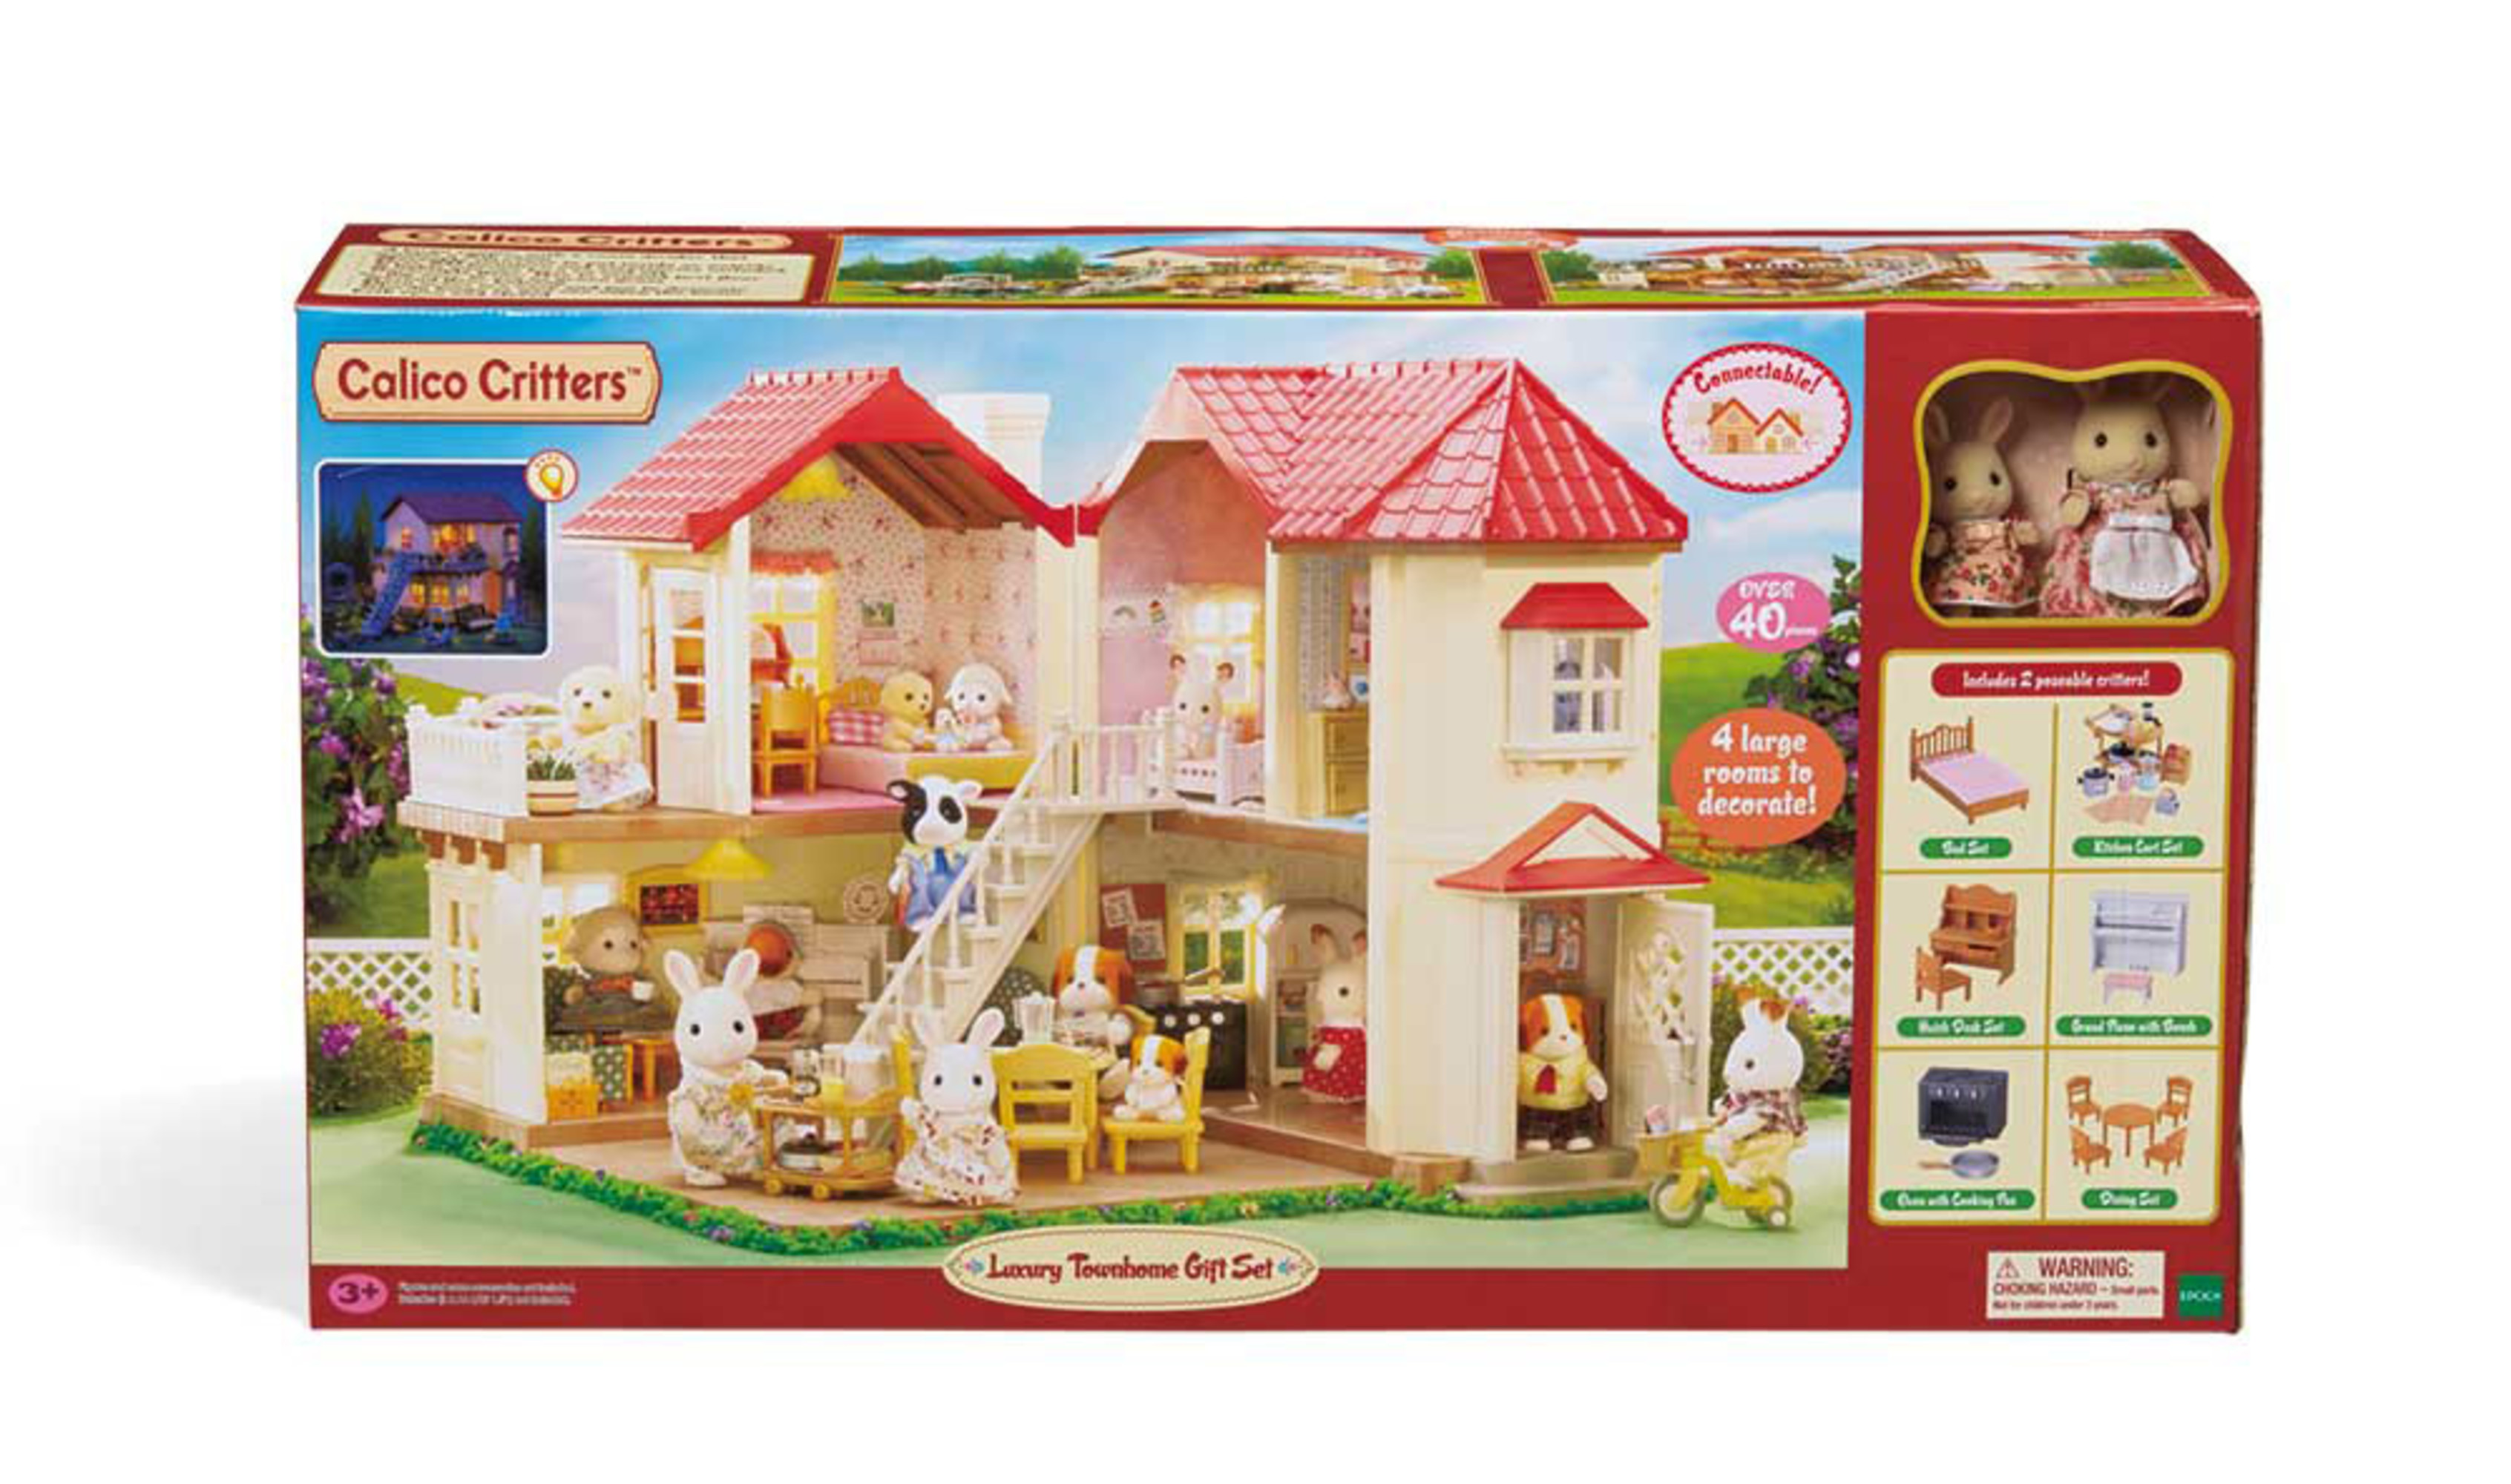 Calico Critters Luxury Townhome Gift Set - image 18 of 18